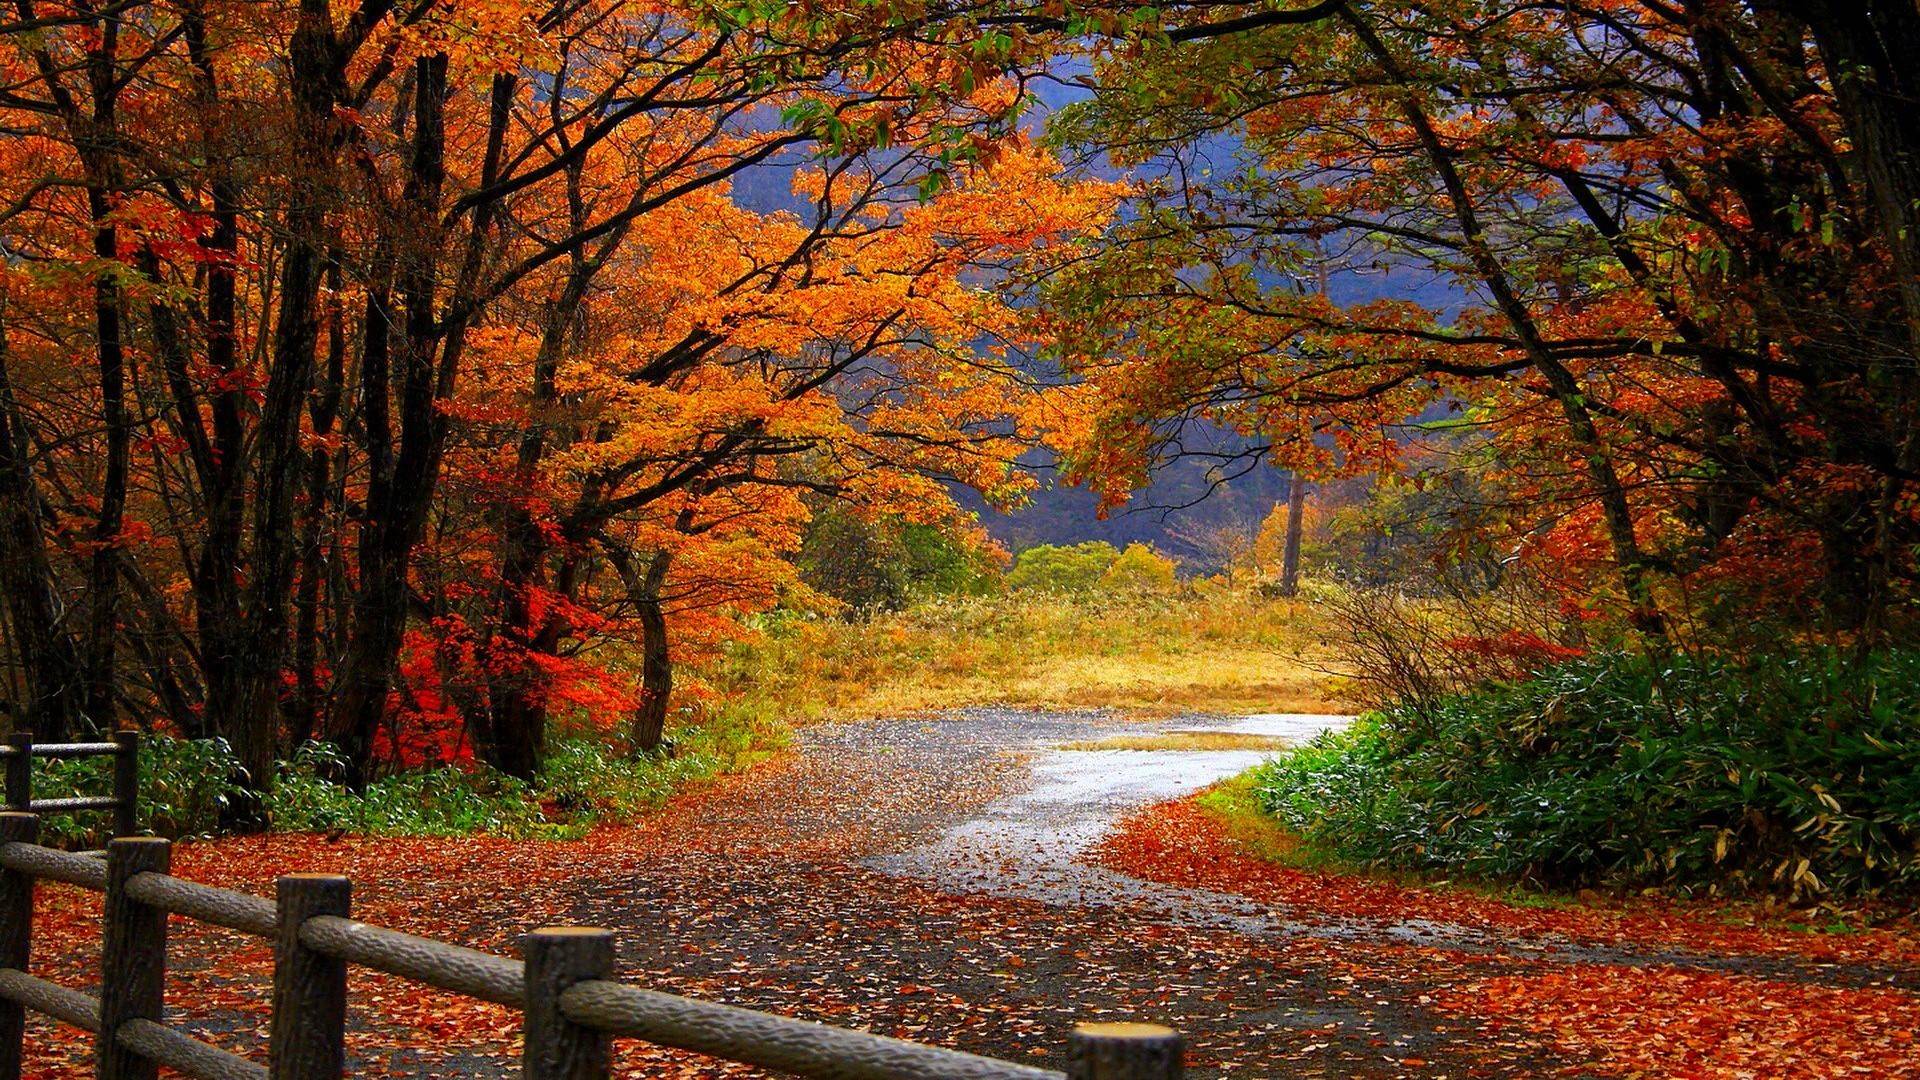 Landscapes nature trees roads forests autumn fall seasons colors